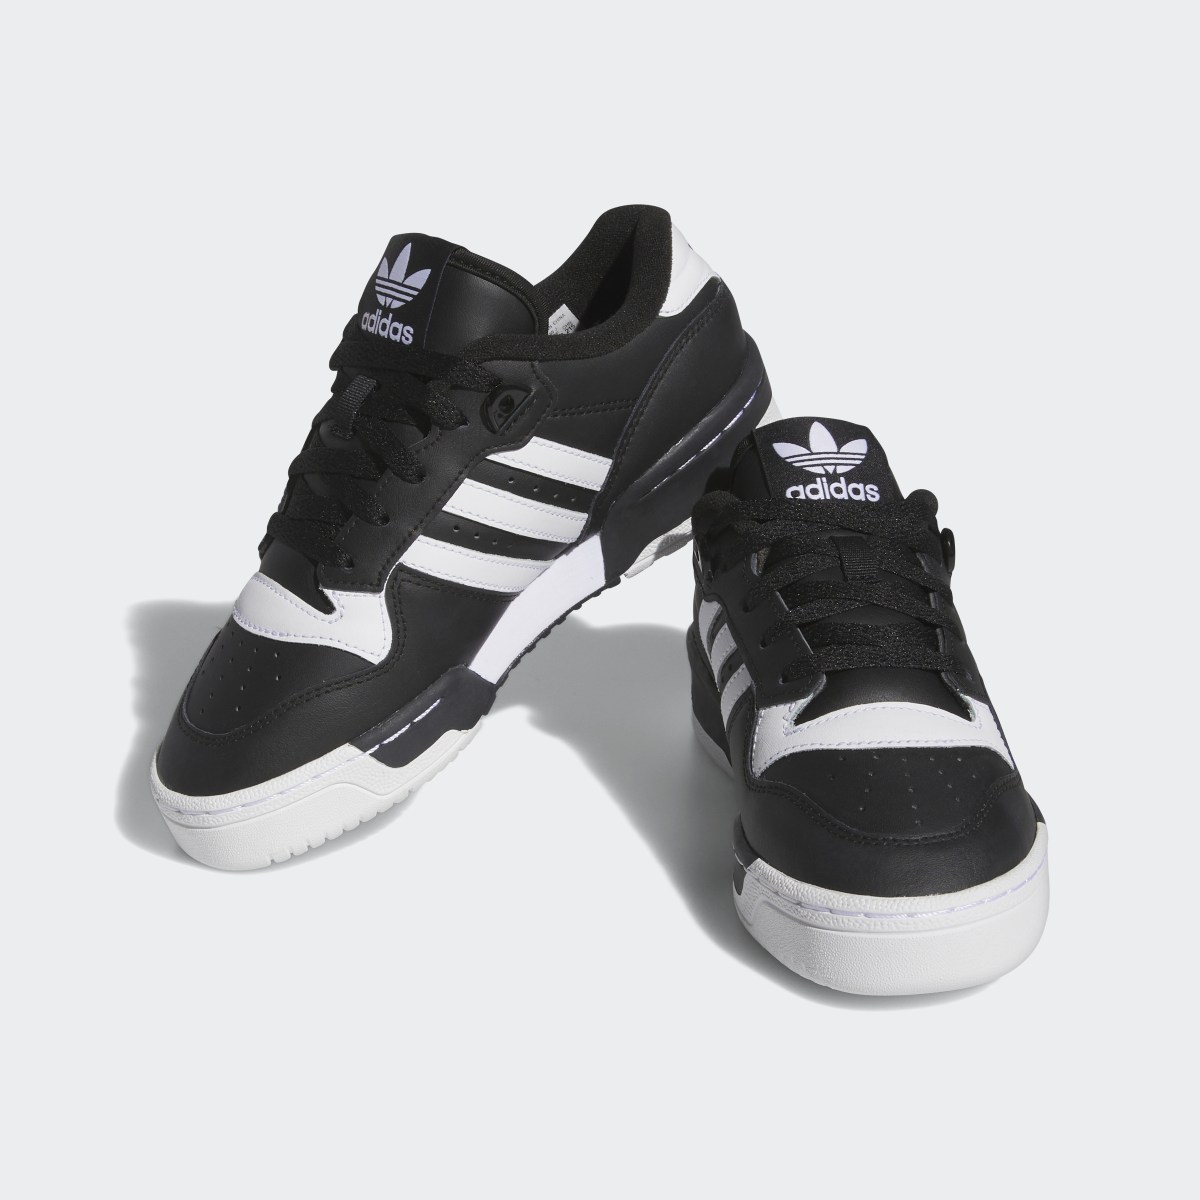 Adidas Rivalry Low Shoes Kids. 5